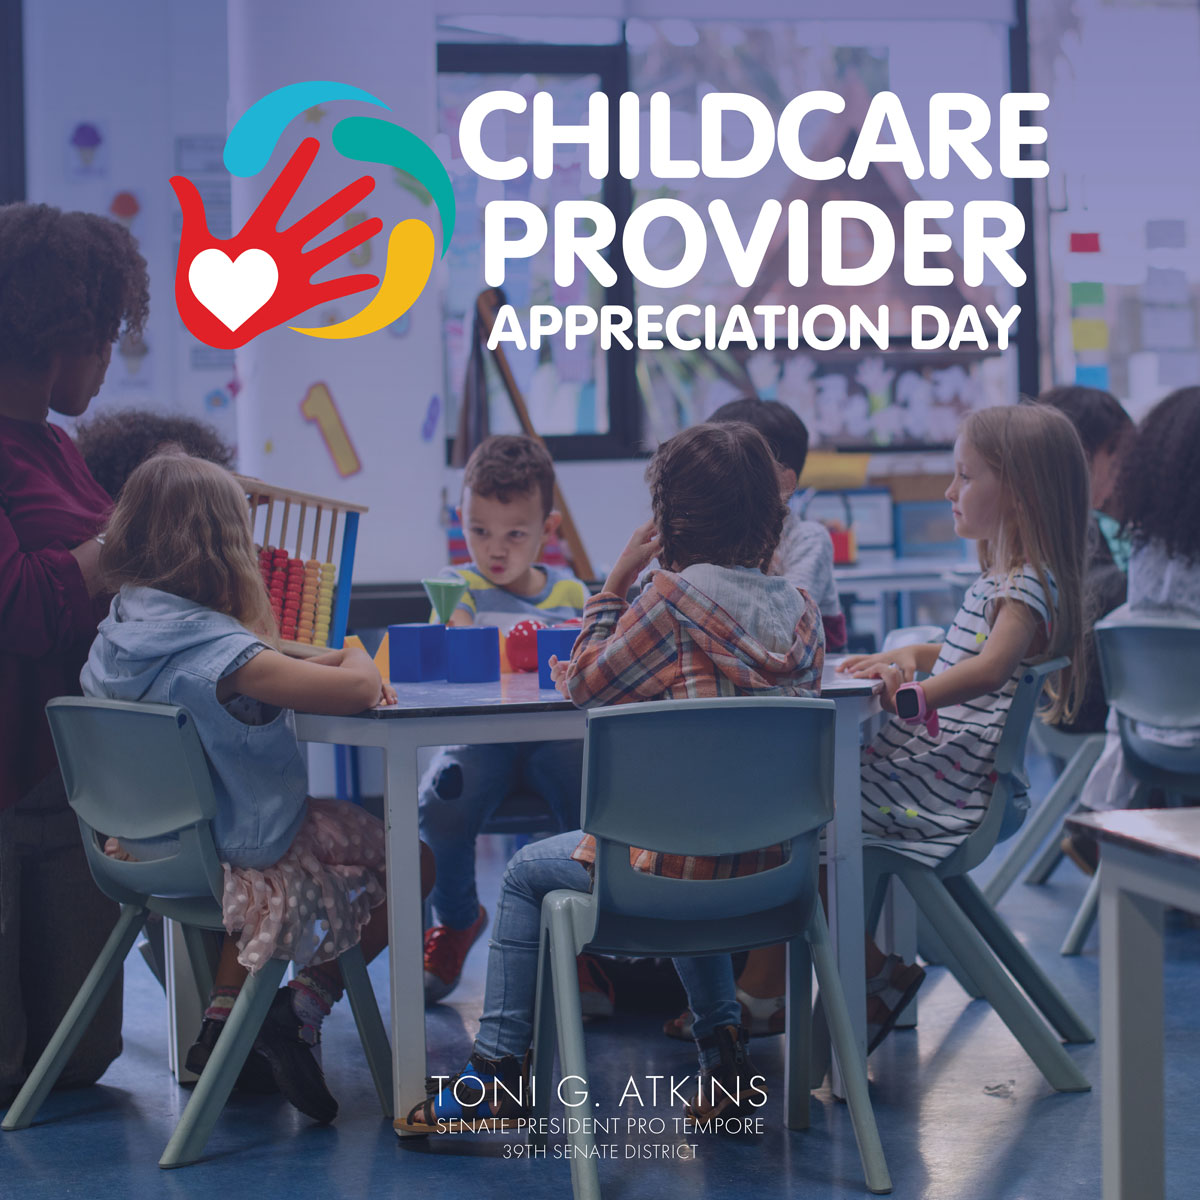 Child care providers support working parents and help our children reach key developmental milestones. The #CALeg recognizes that to support providers and expand access to childcare, we need to provide appropriate rates for child care workers. #ChildcareProviderAppreciationDay